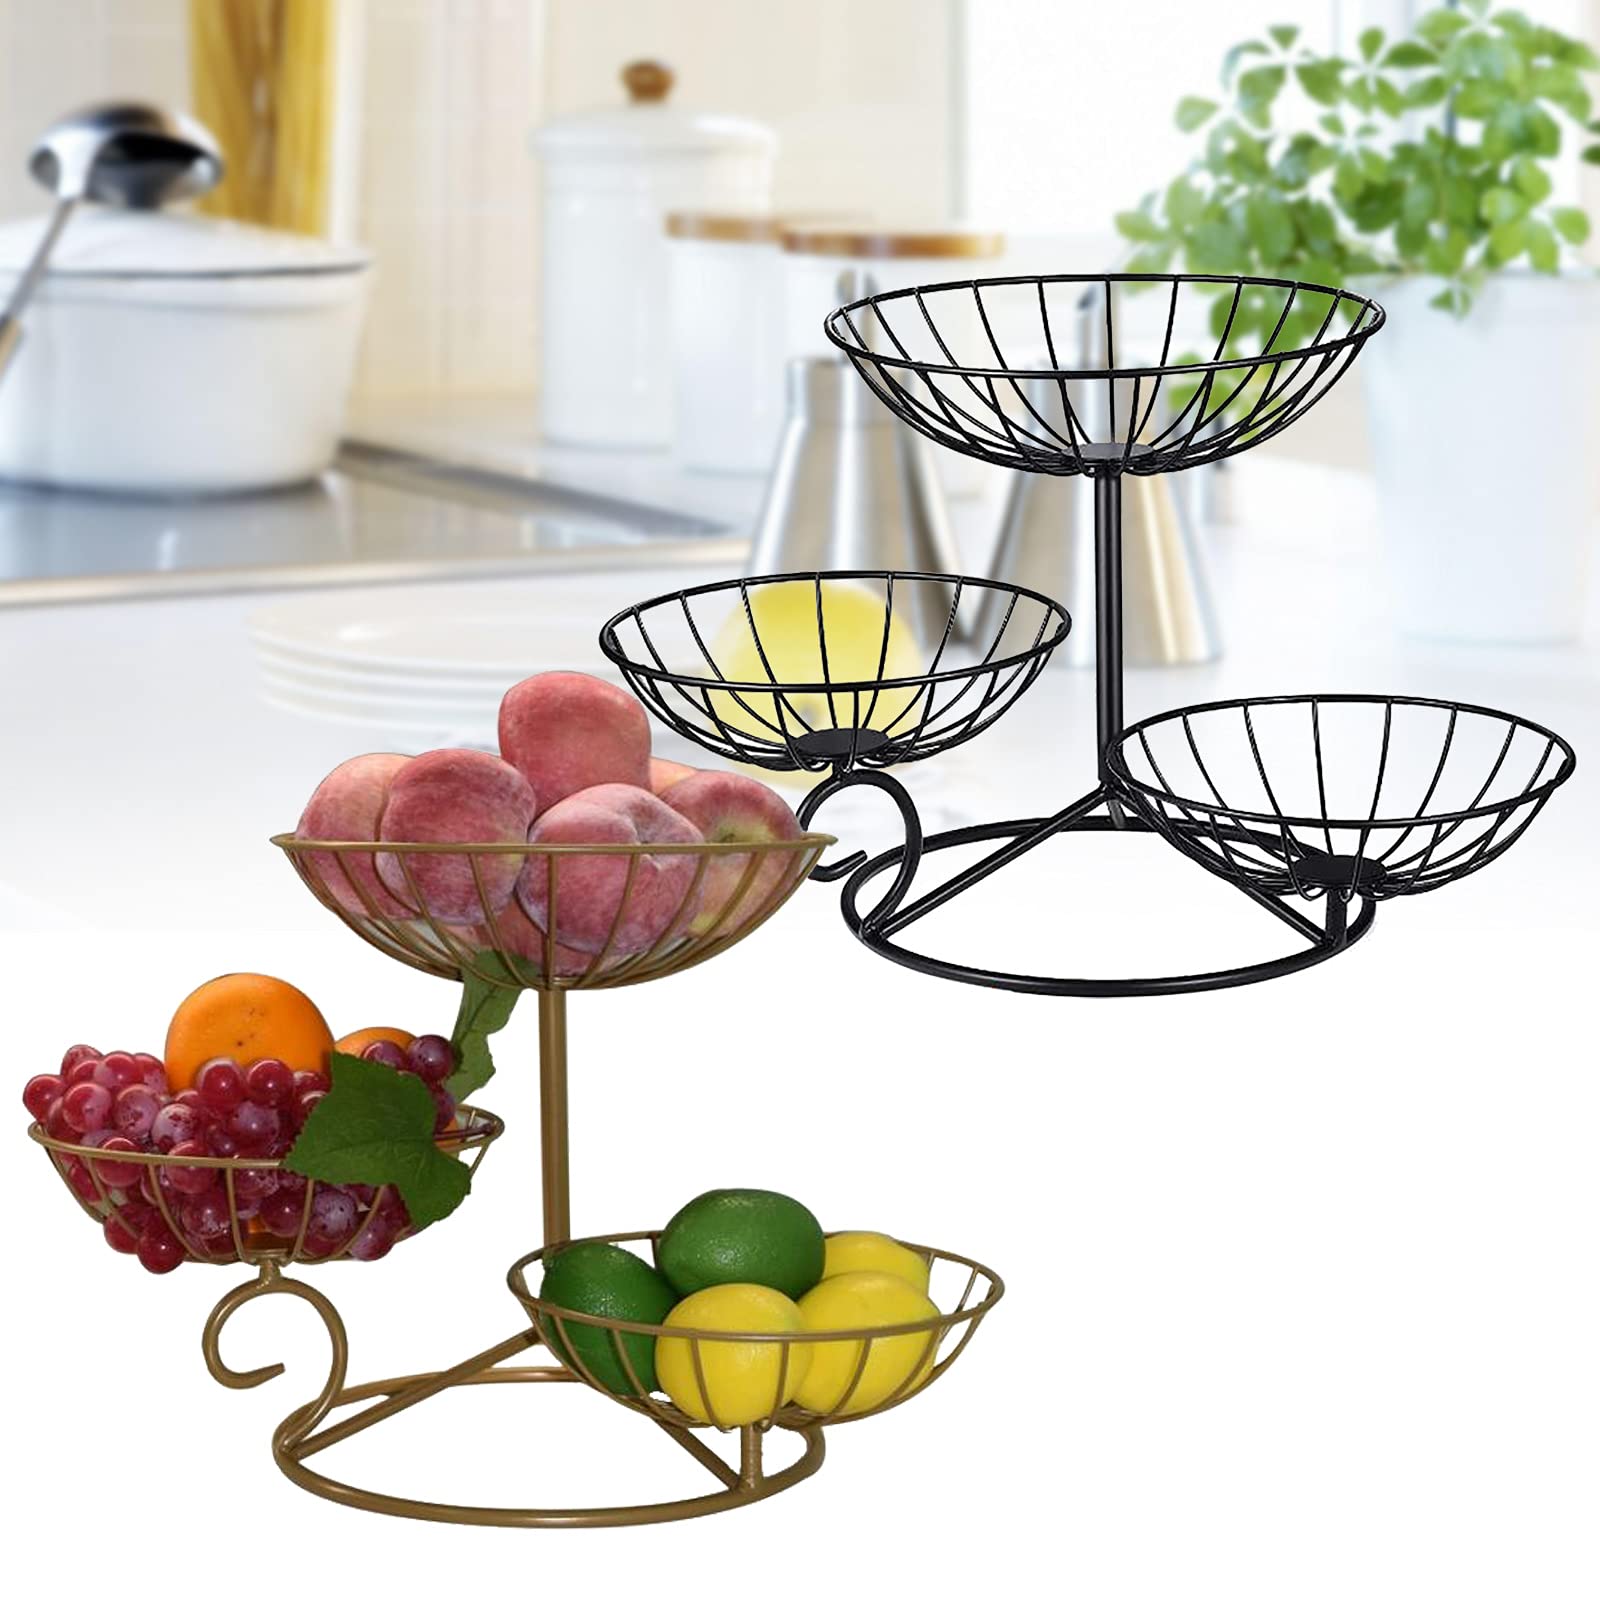 Fruit Plate Stand, 3 Plates Fruit Bowl Fruit Tiered Tray Metal Fruit Basket Countertop Fruit Snack Candy Storage Basket for Counter Kitchen Organizer (Black)